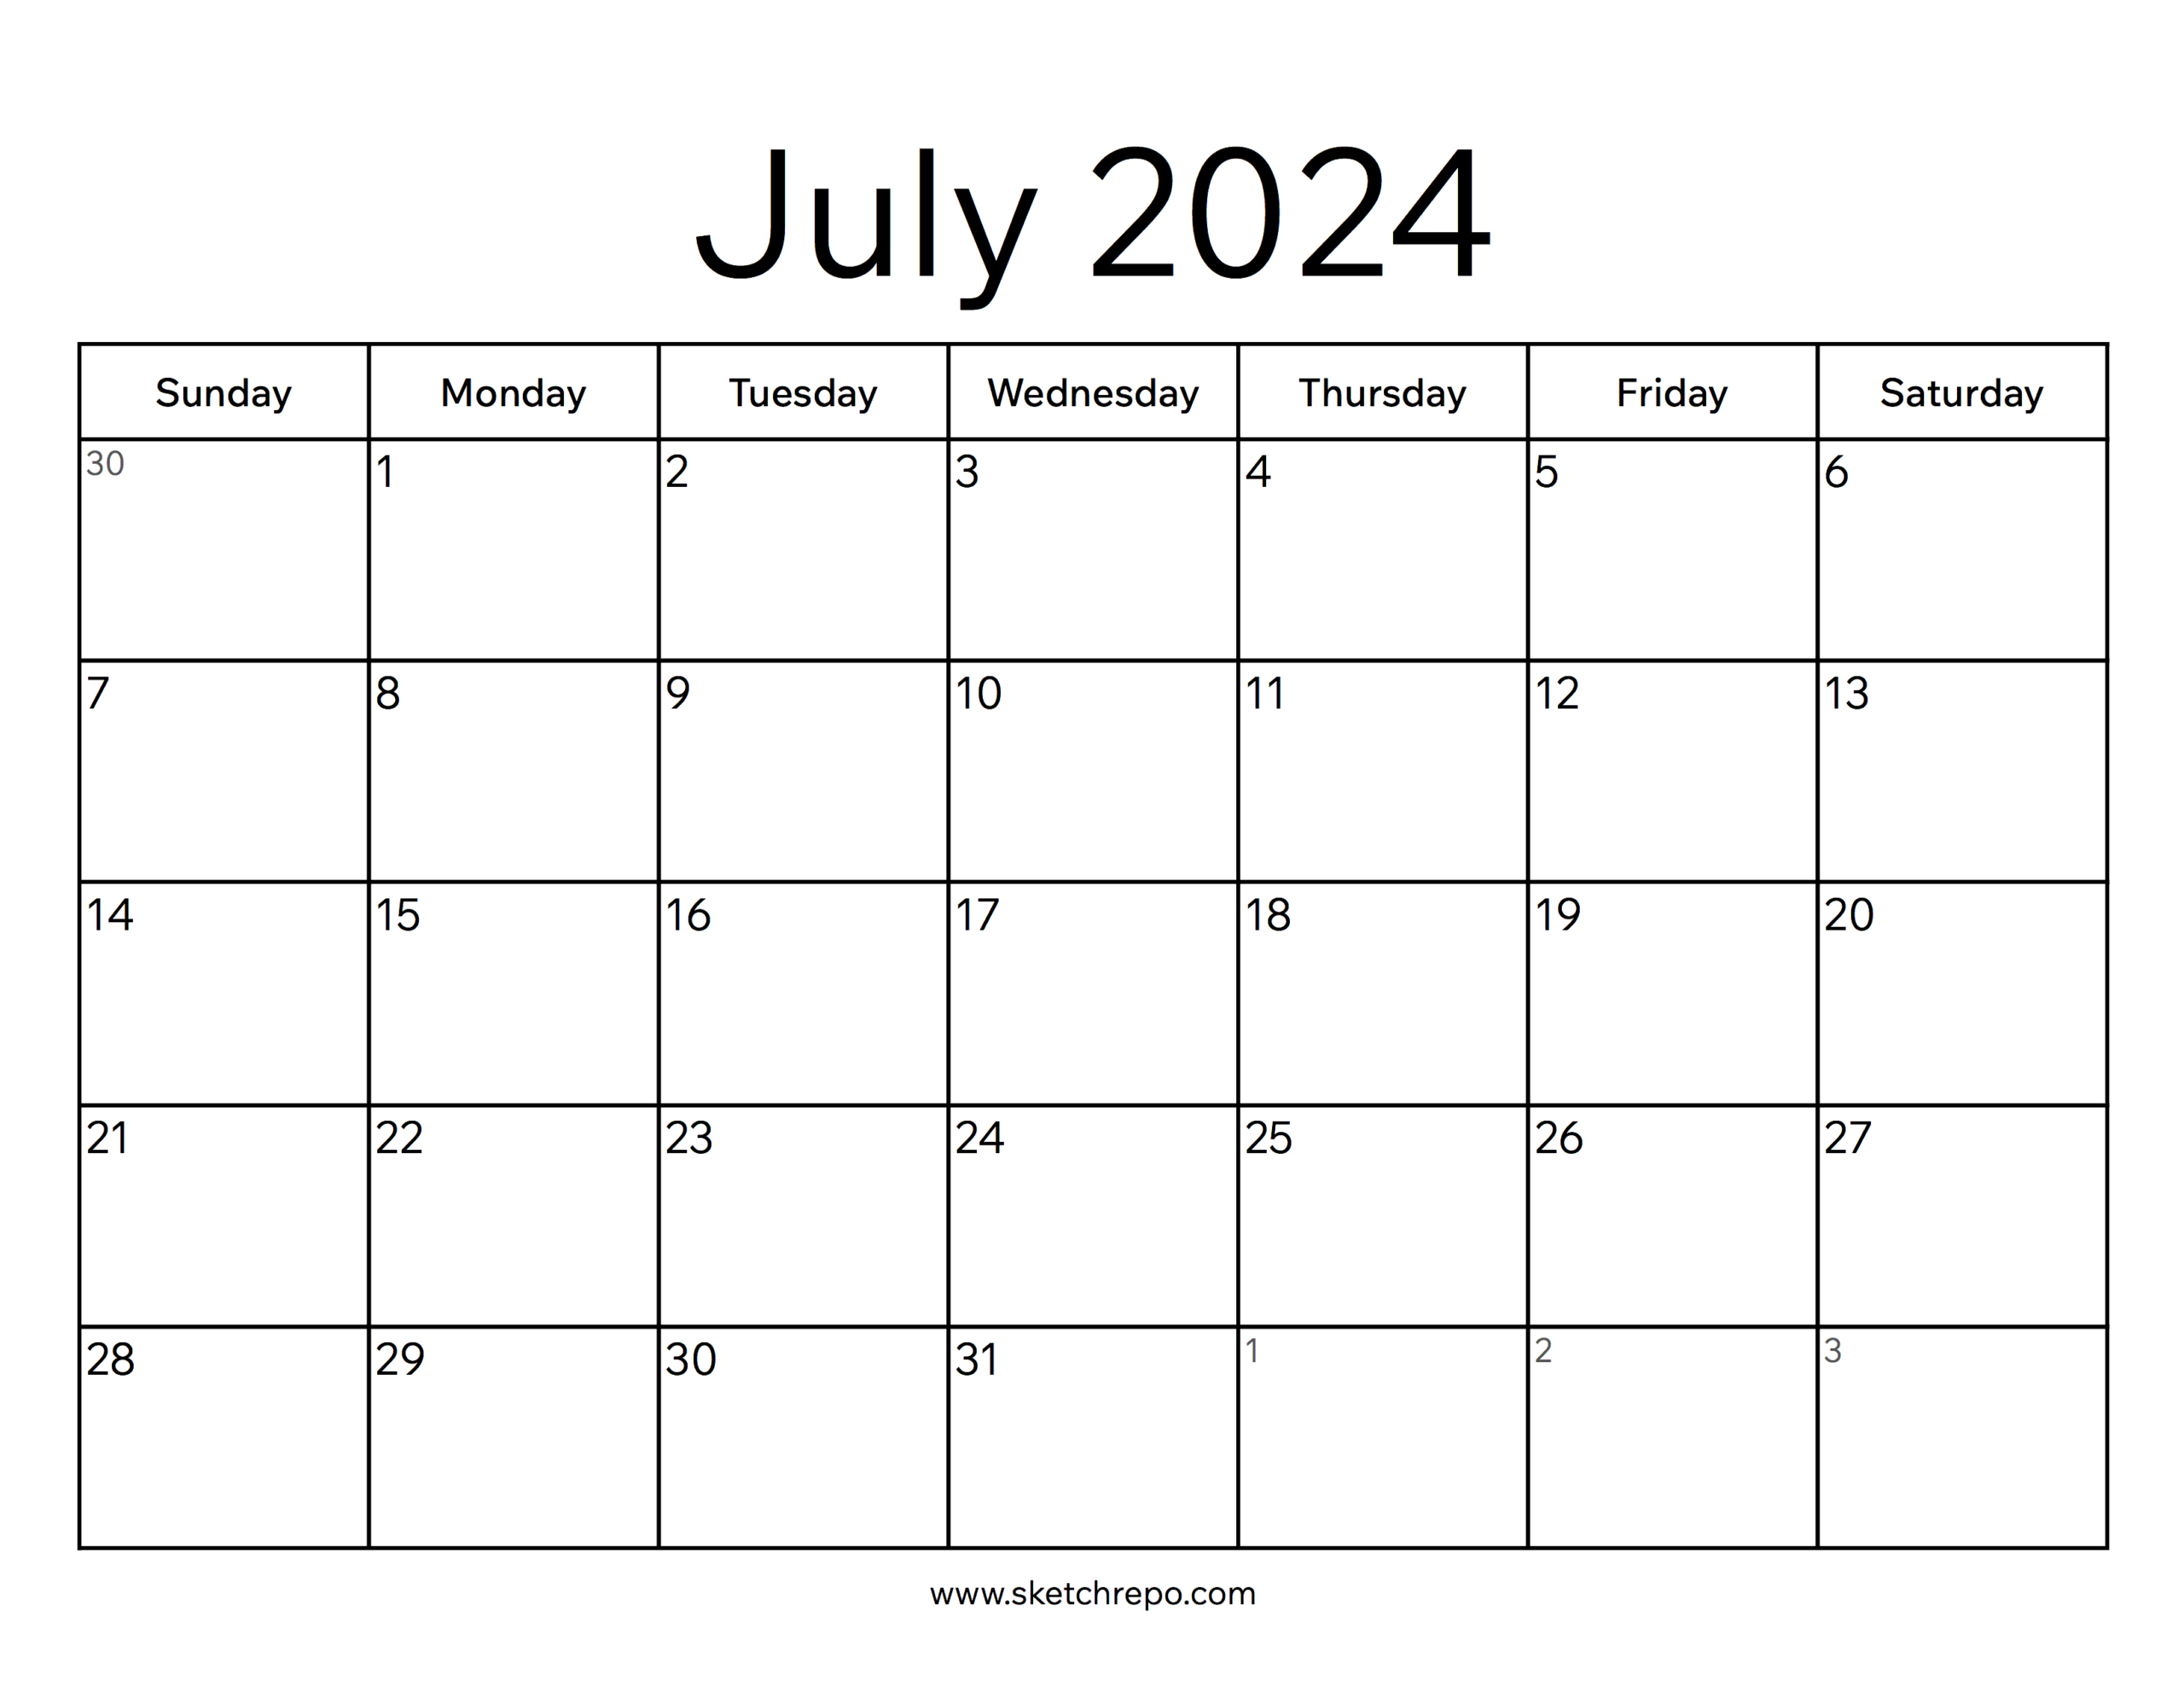 July 2024 Calendar – Sketch Repo throughout Give Me the Calendar For July 2024